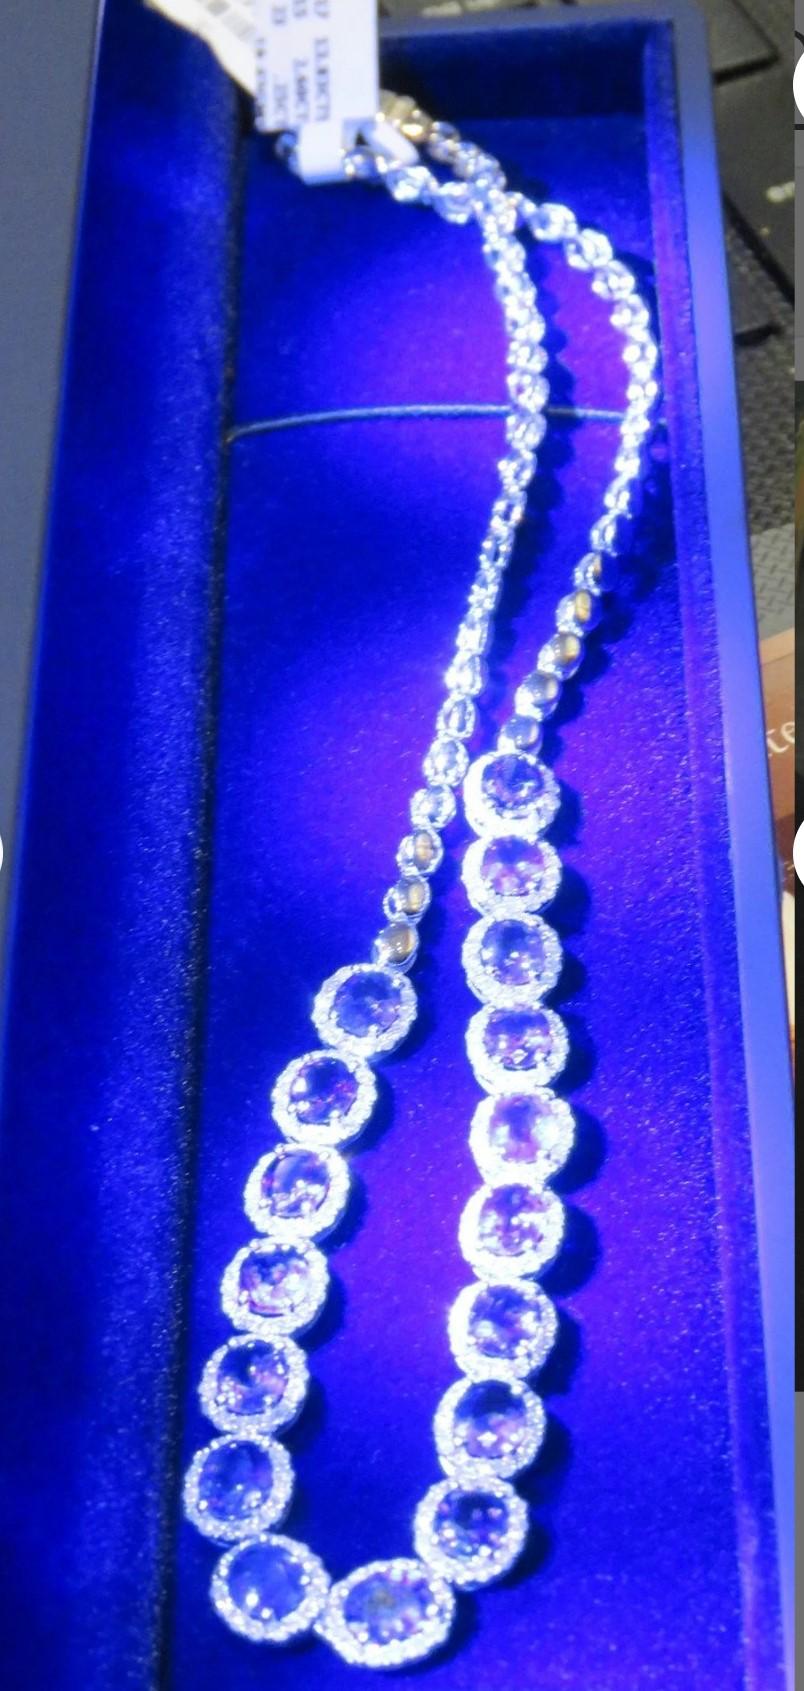 The Following Item we are offering is this Beautiful Rare Important 18KT Gold Gorgeous Glittering Ceylon Blue Sapphire and Sparkling White Diamond Necklace. Necklace is comprised of Magnificent Large Magnificent Oval Cut Sapphires surrounded by a